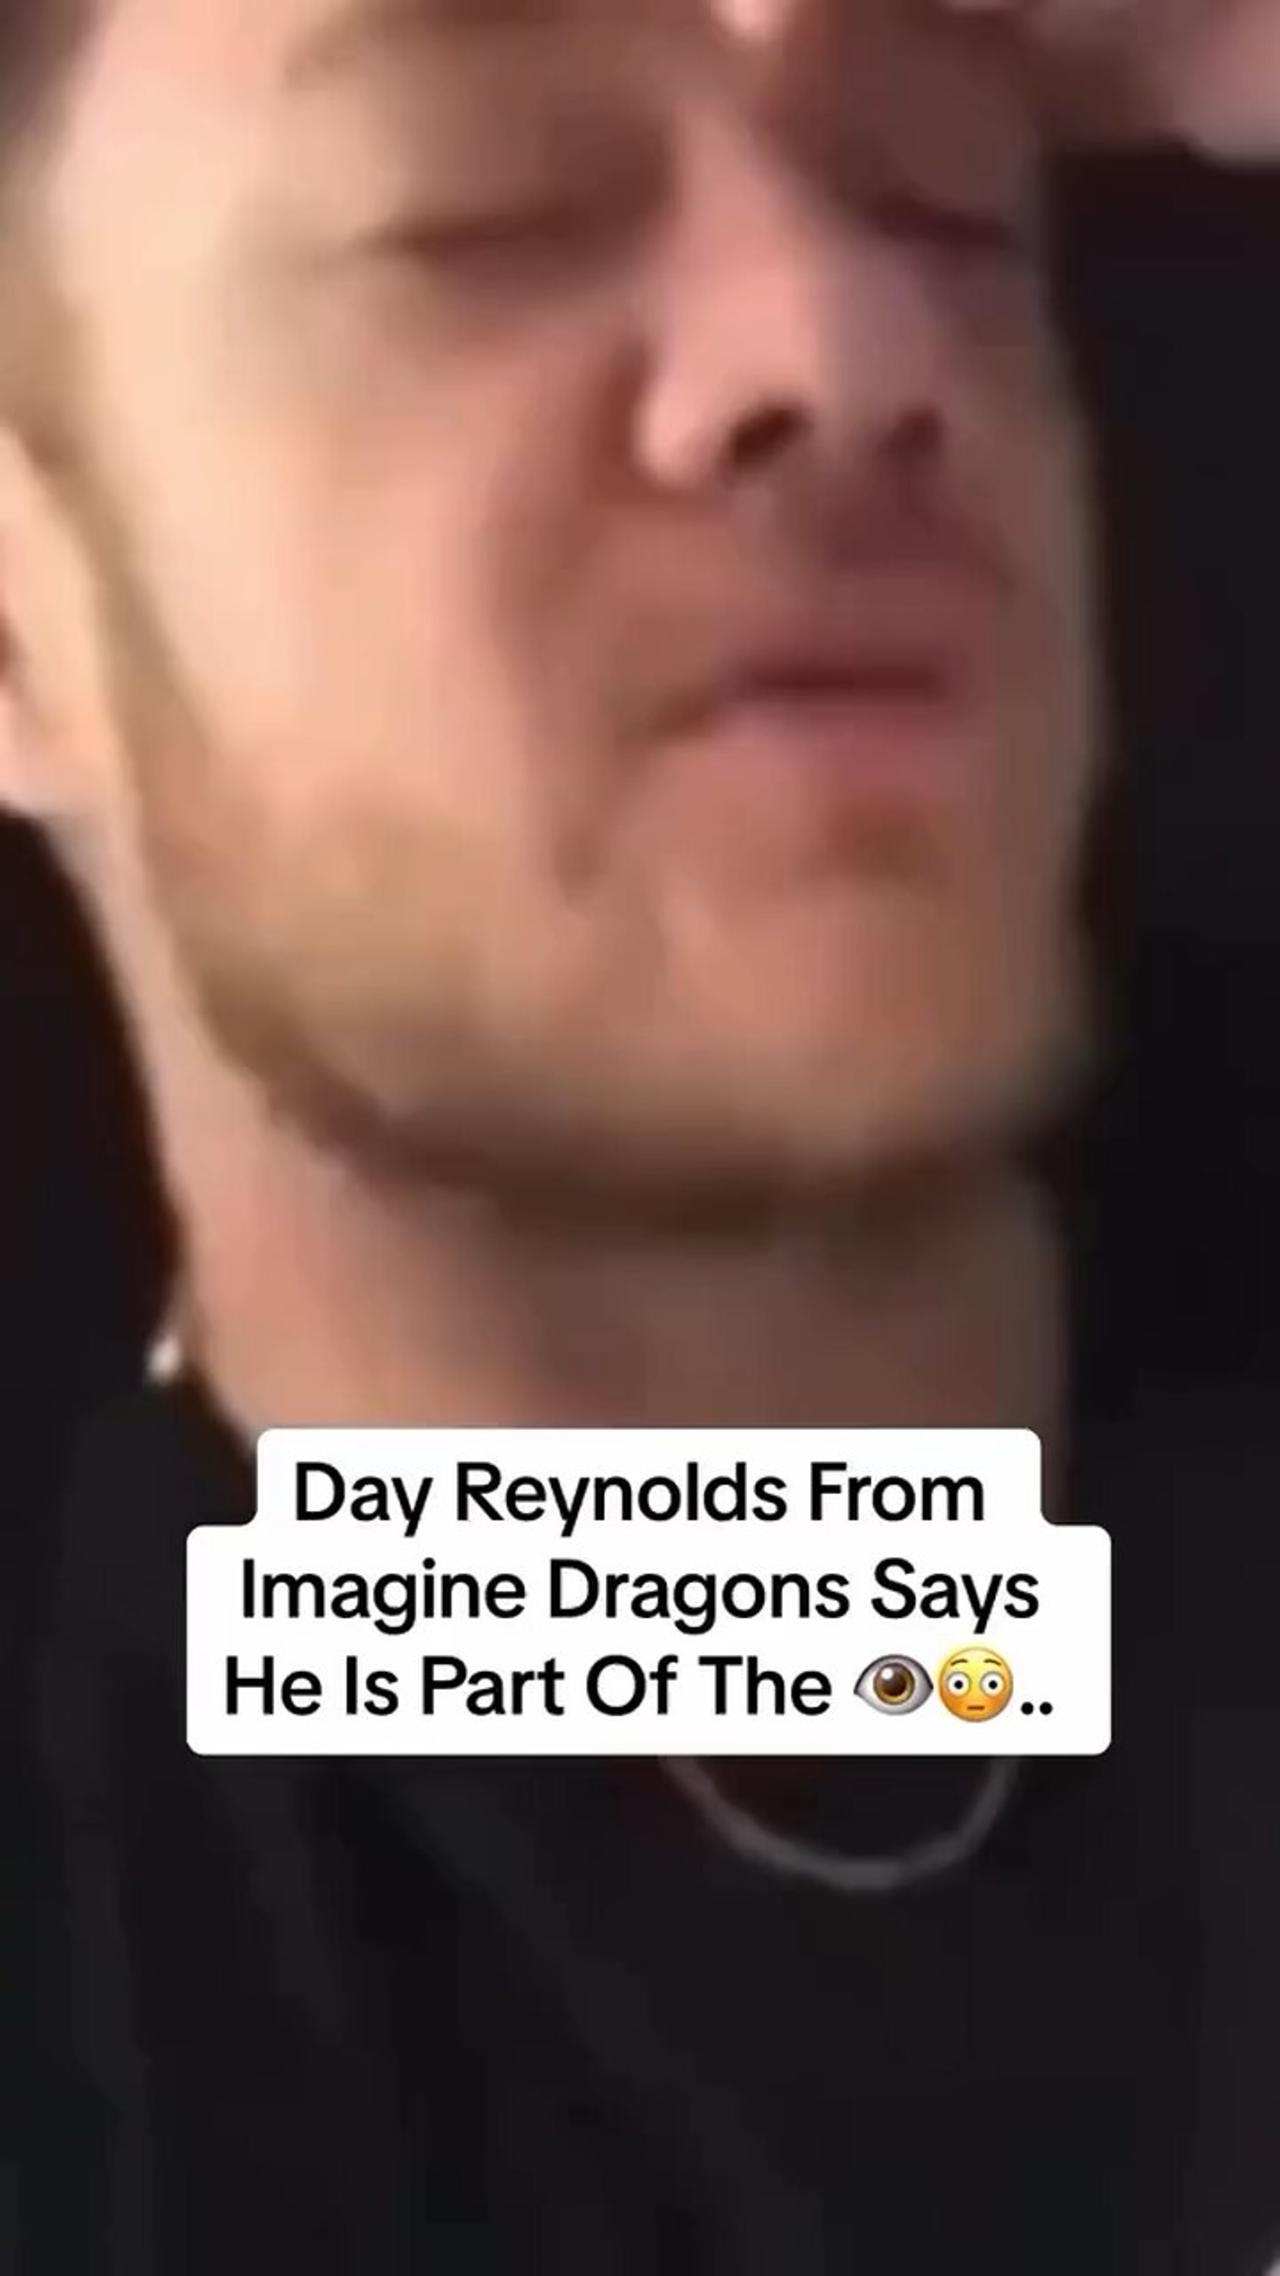 Day renolds from imagine dragons confesses